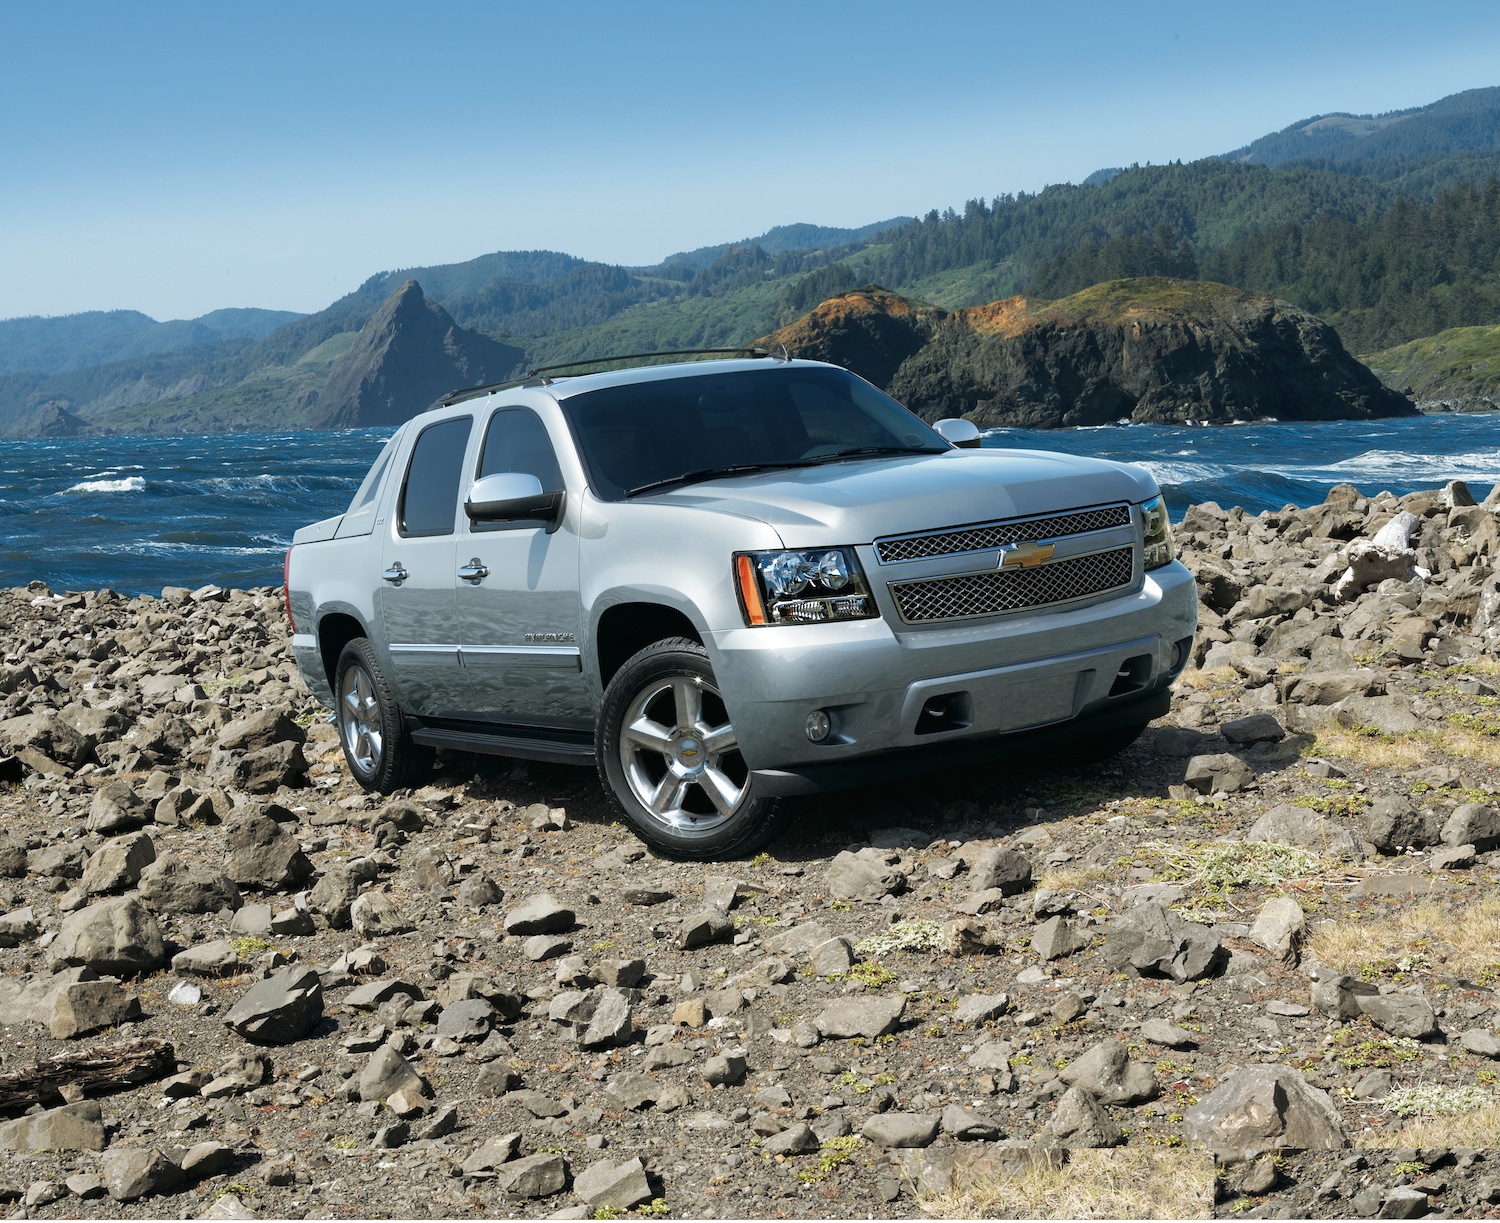 The Inside Scoop On Why Gm Discontinued The Chevy Avalanche